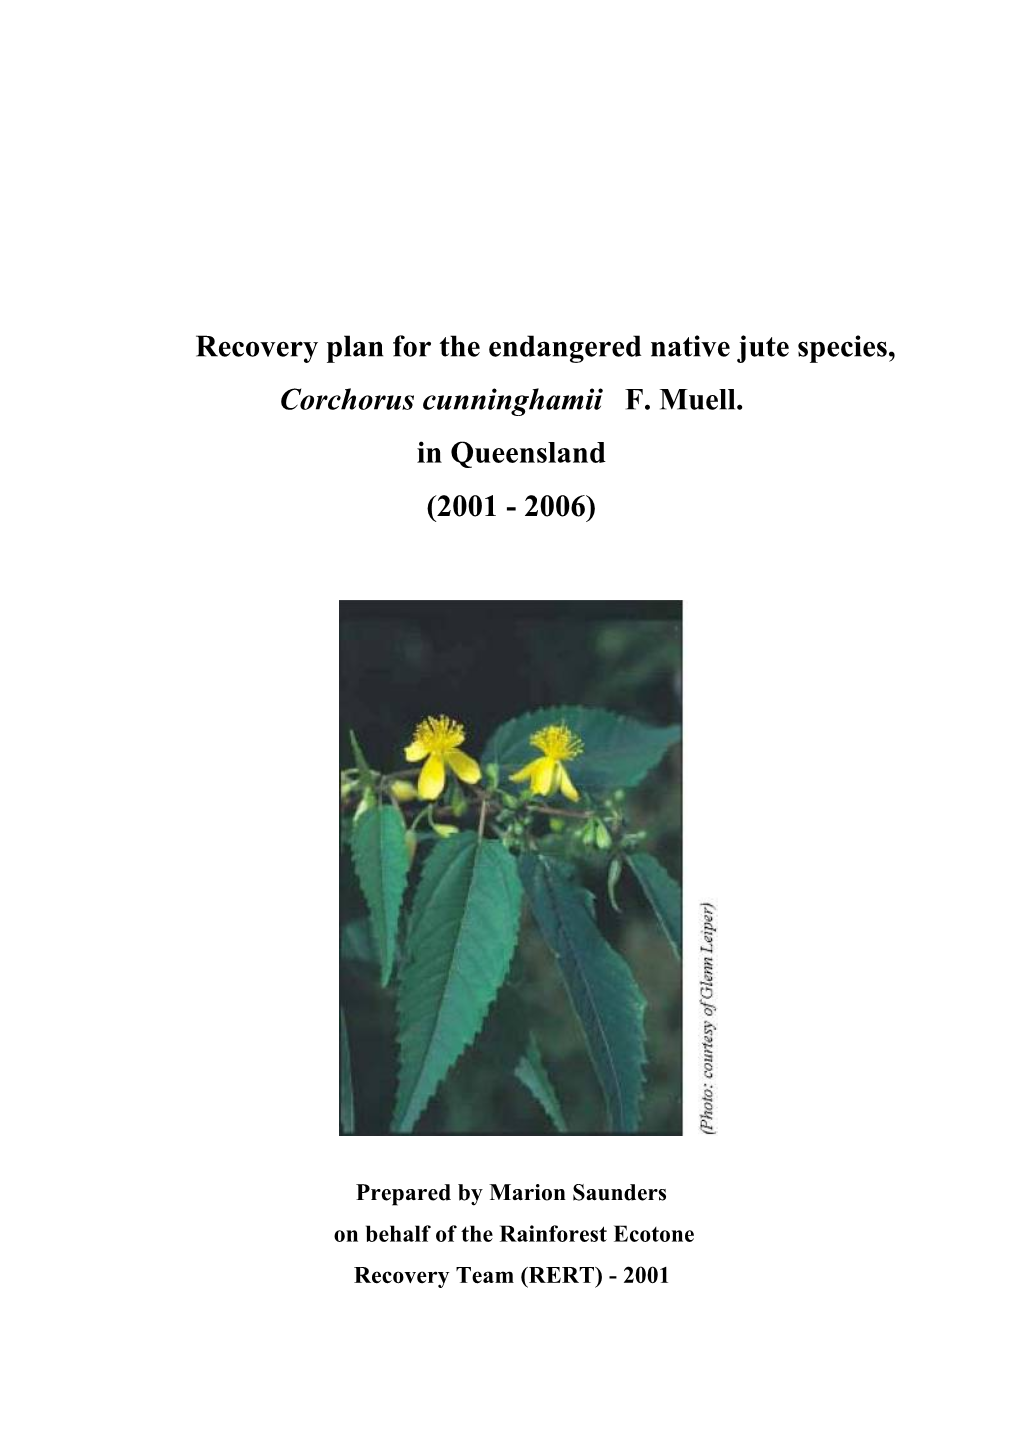 Recovery Plan for the Endangered Native Jute Species, Corchorus Cunninghamii F. Muell